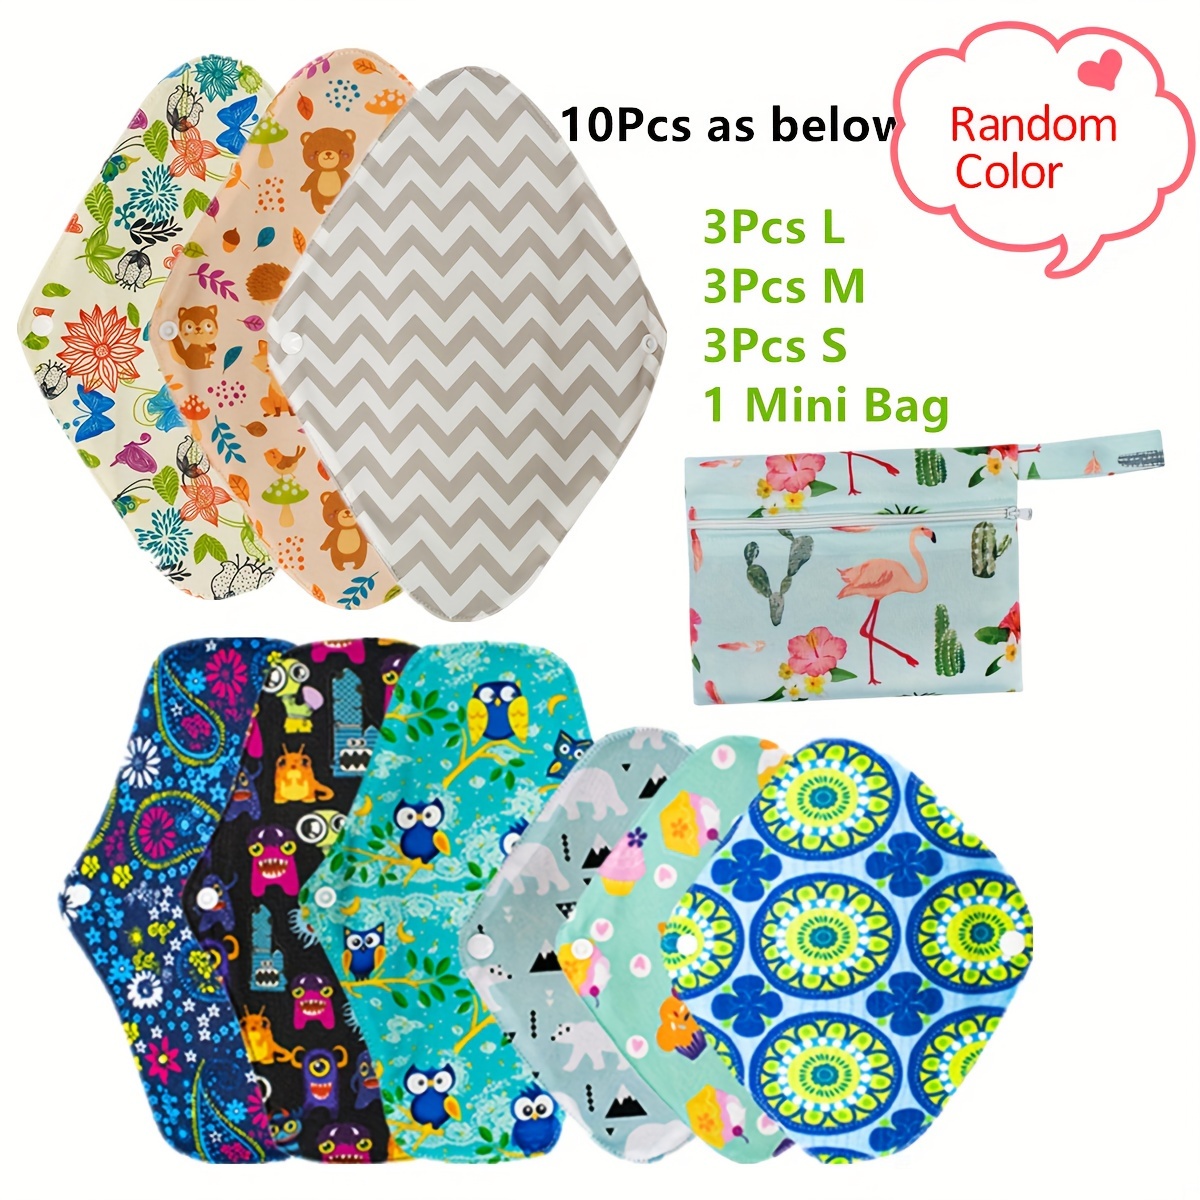 10pcs Sanitary Pad Reusable Washable Cloth Menstrual Pads Panty Liners  Charcoal Bamboo Pads Small M Large With 1pc Waterproof Mini Bag Random Color